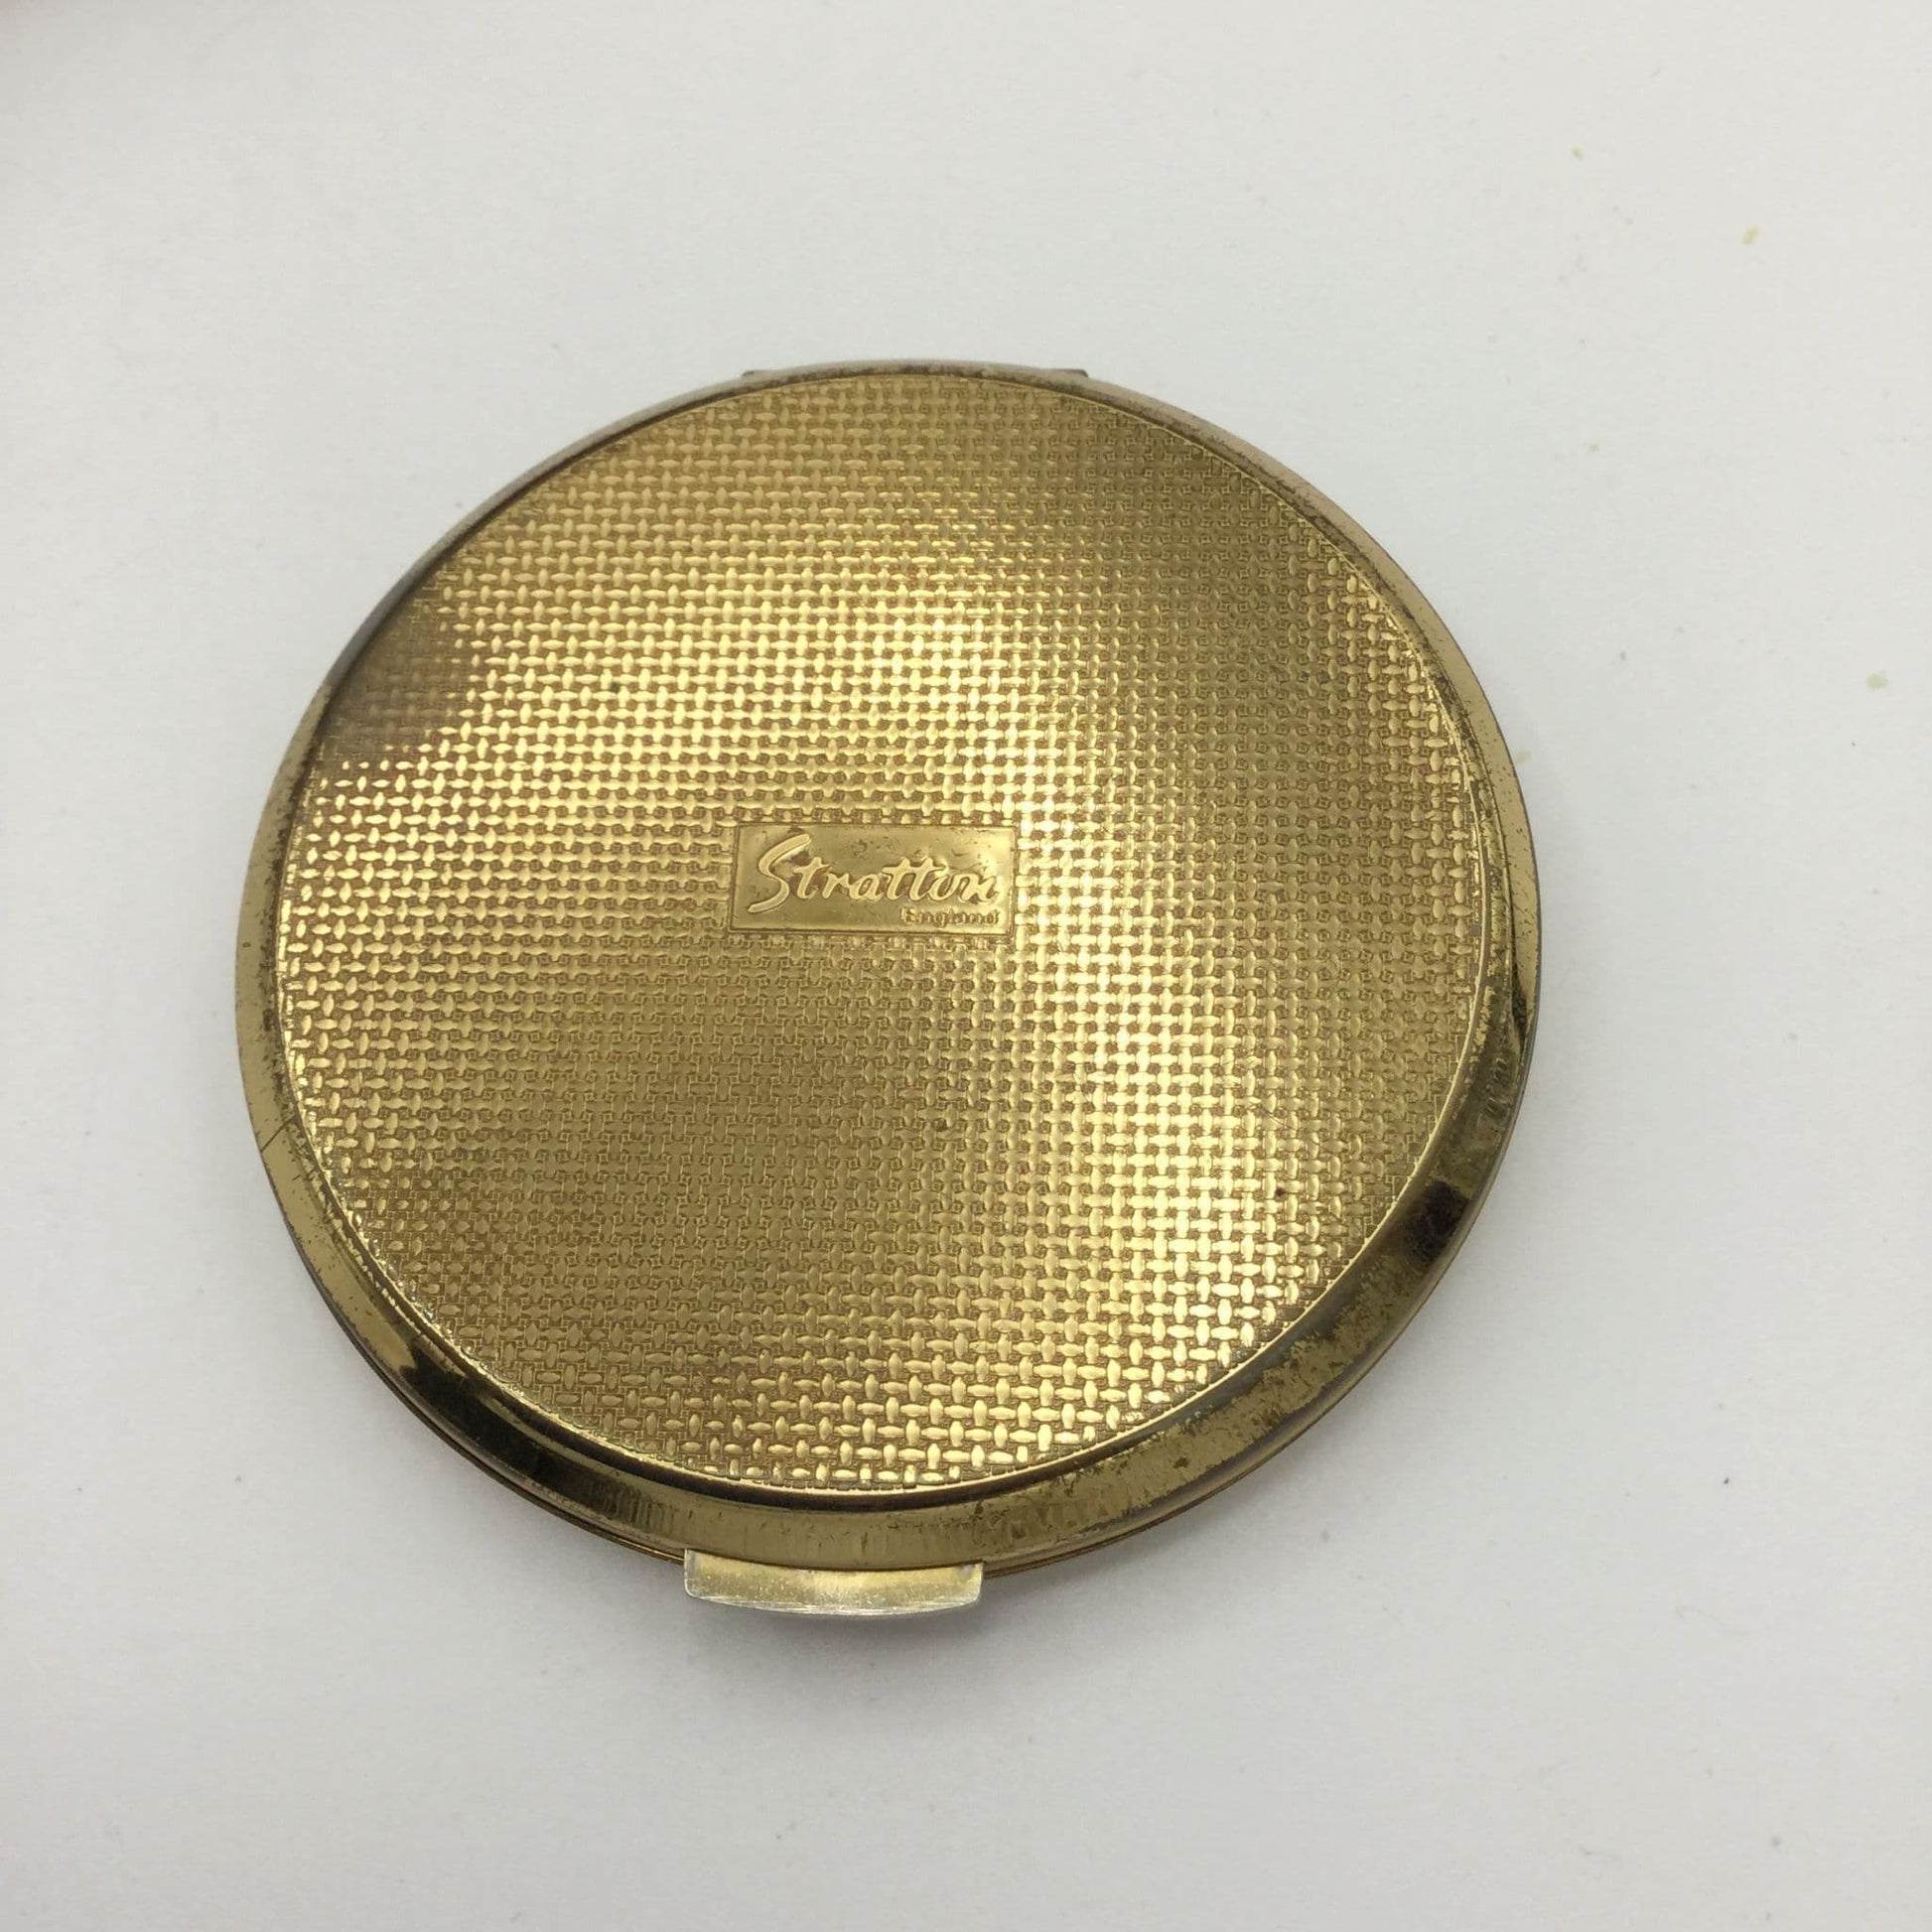 Base of Stratton compact with woven gold design on base